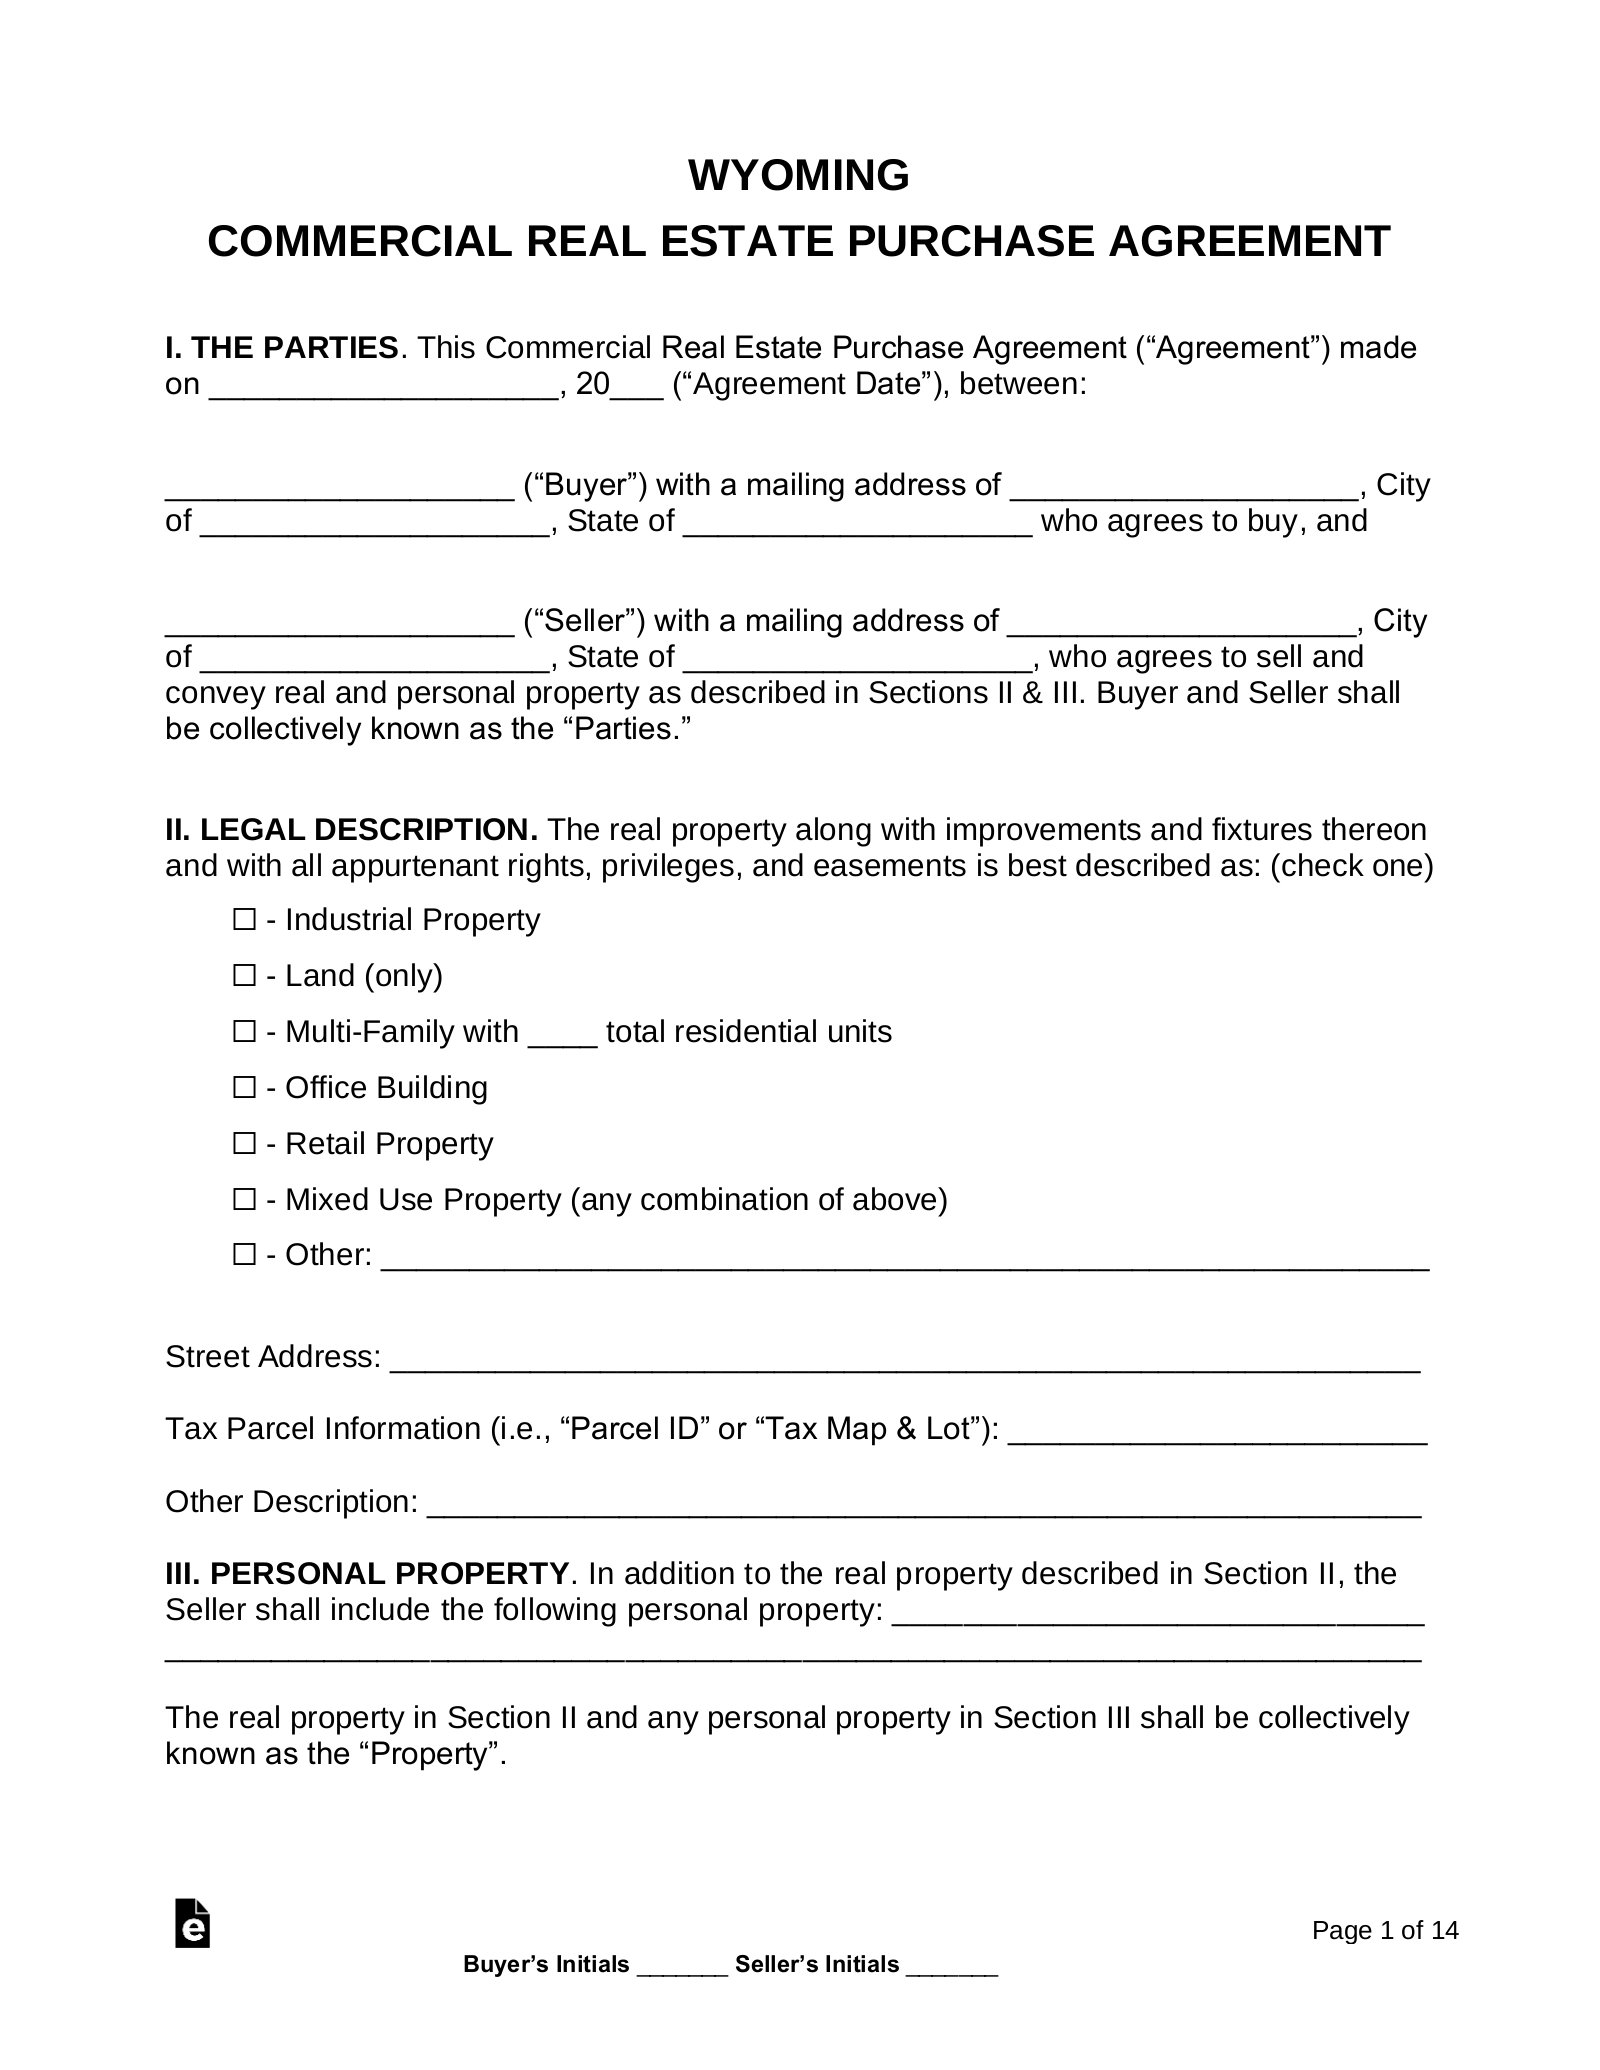 Wyoming Commercial Real Estate Purchase and Sale Agreement